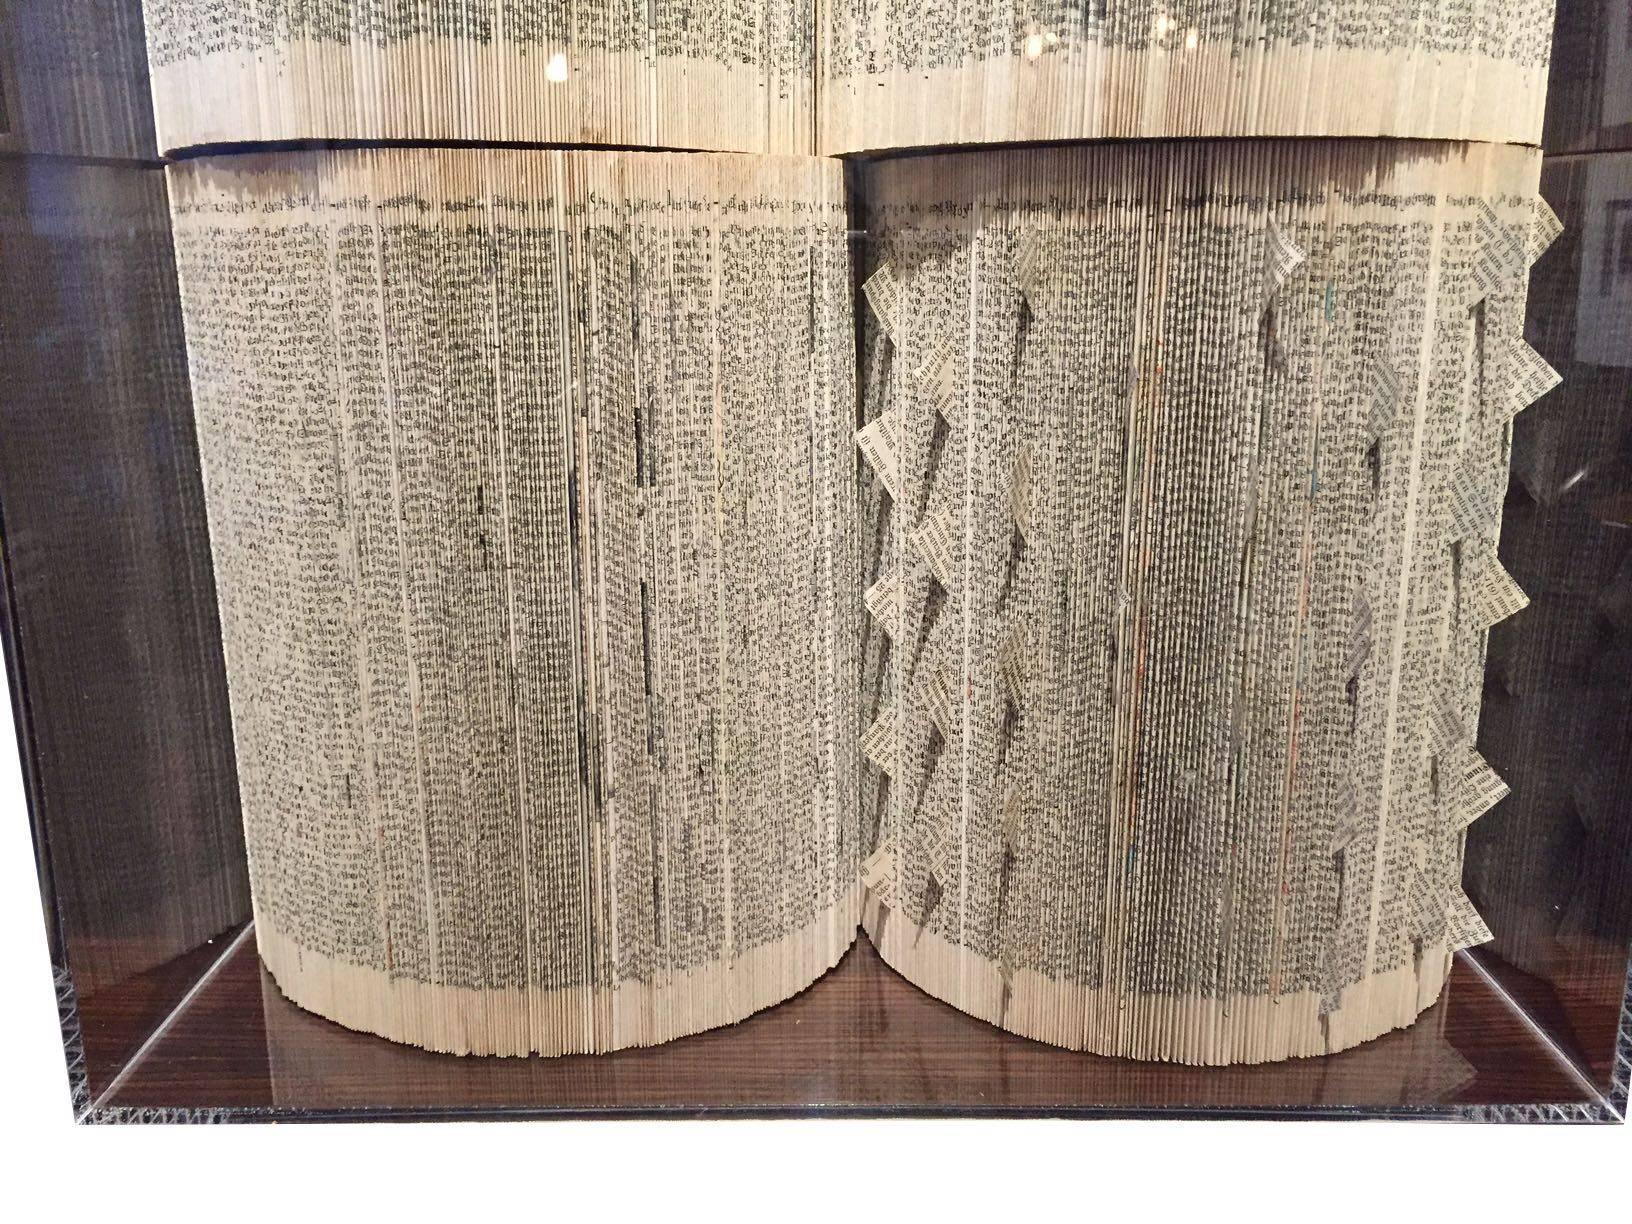 Italian handmade wall art sculpture made of vintage books.
Each page is hand folded to make an intricate design.
A set of four books in a plexi frame completes the sculpture.
The books are dated 1964 and are Storia della Letteratura Italiana